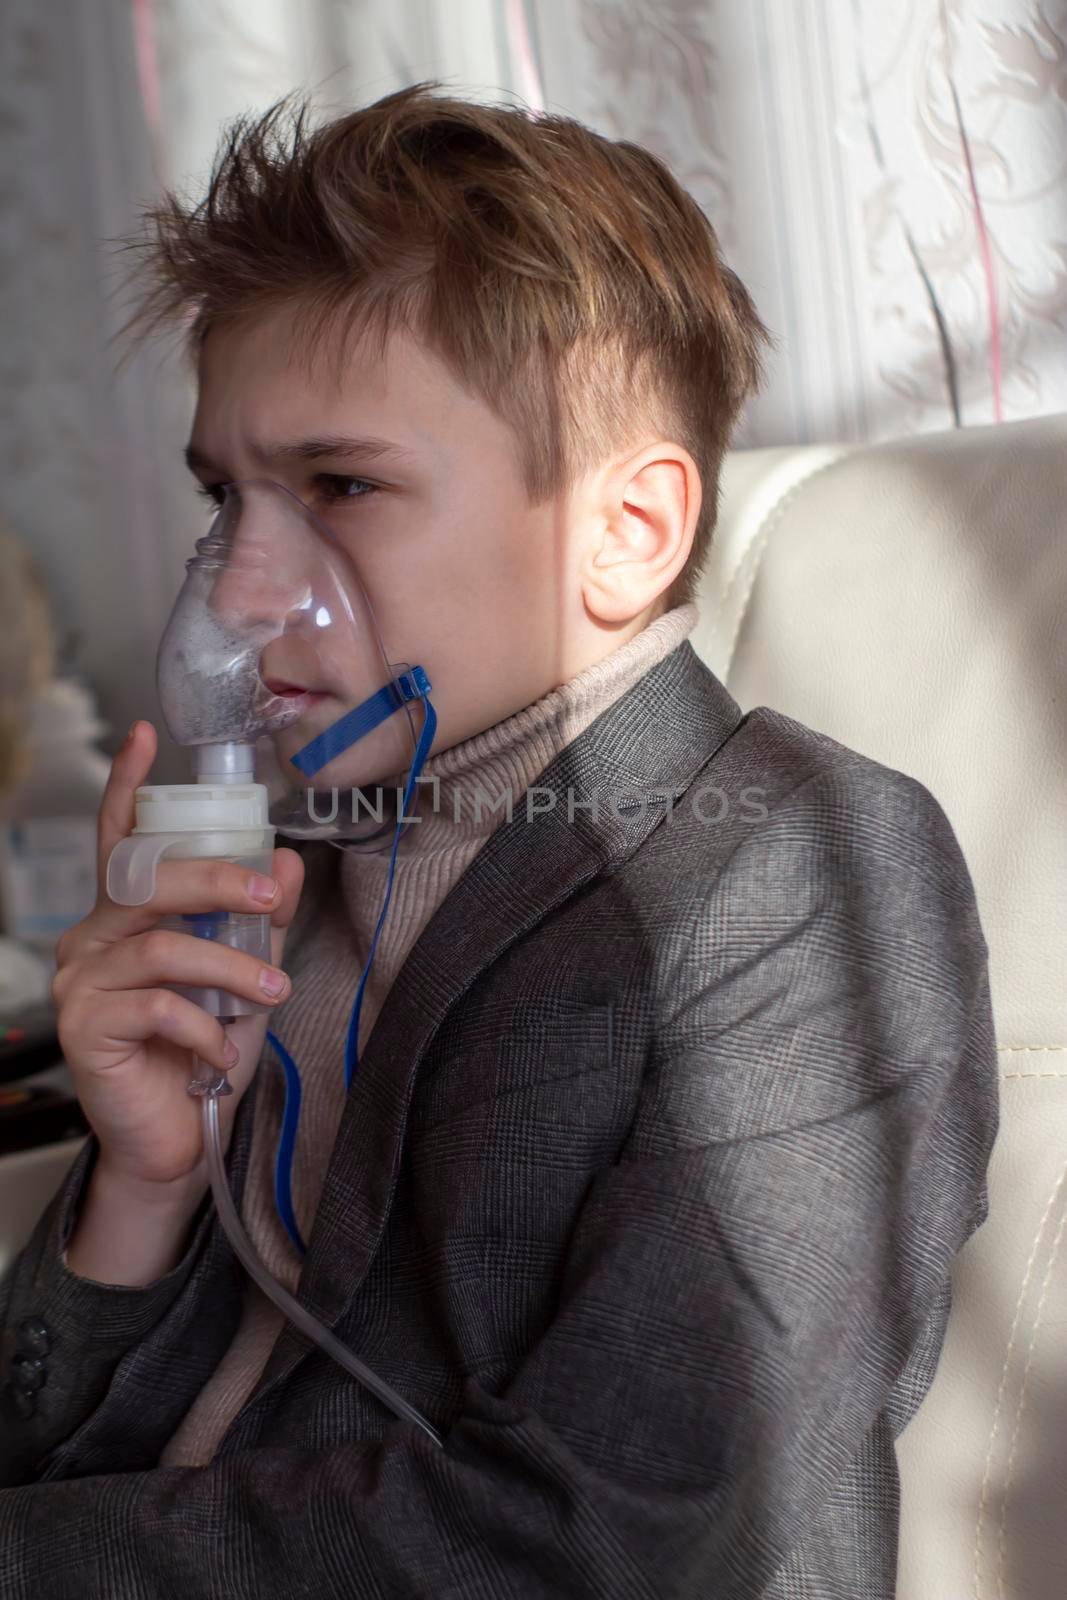 Little boy having inhalation for easing cough. Caucasian blonde boy inhales couples containing medication to stop coughing. Medical procedures. Inhaler. Respiratory medicine.